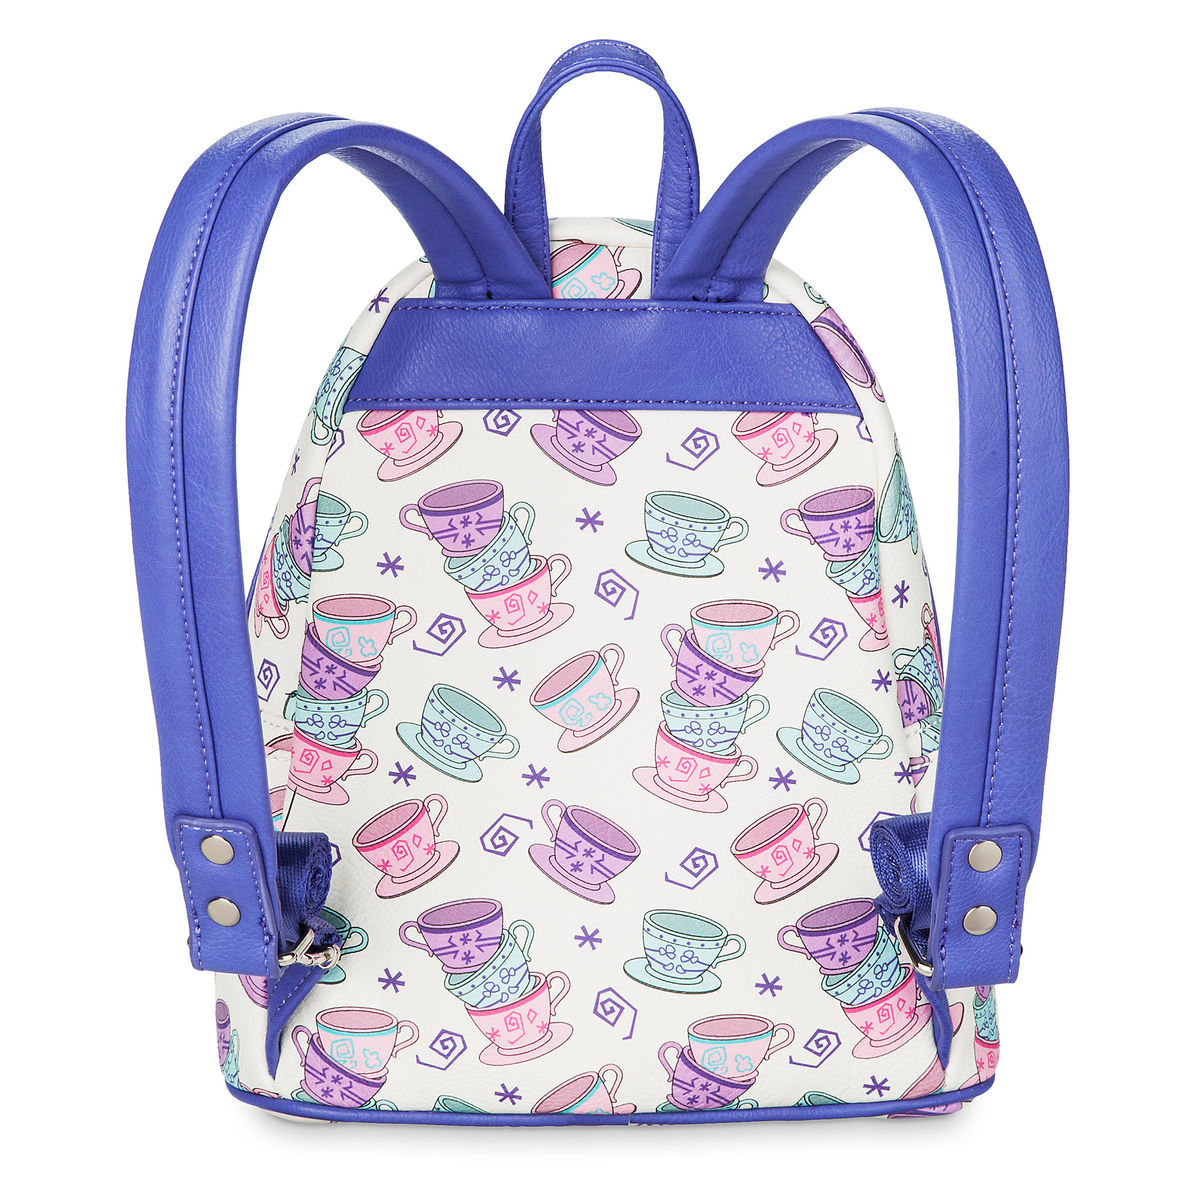 Disney Mad Tea Party Mini Backpack by Loungefly New with Tags